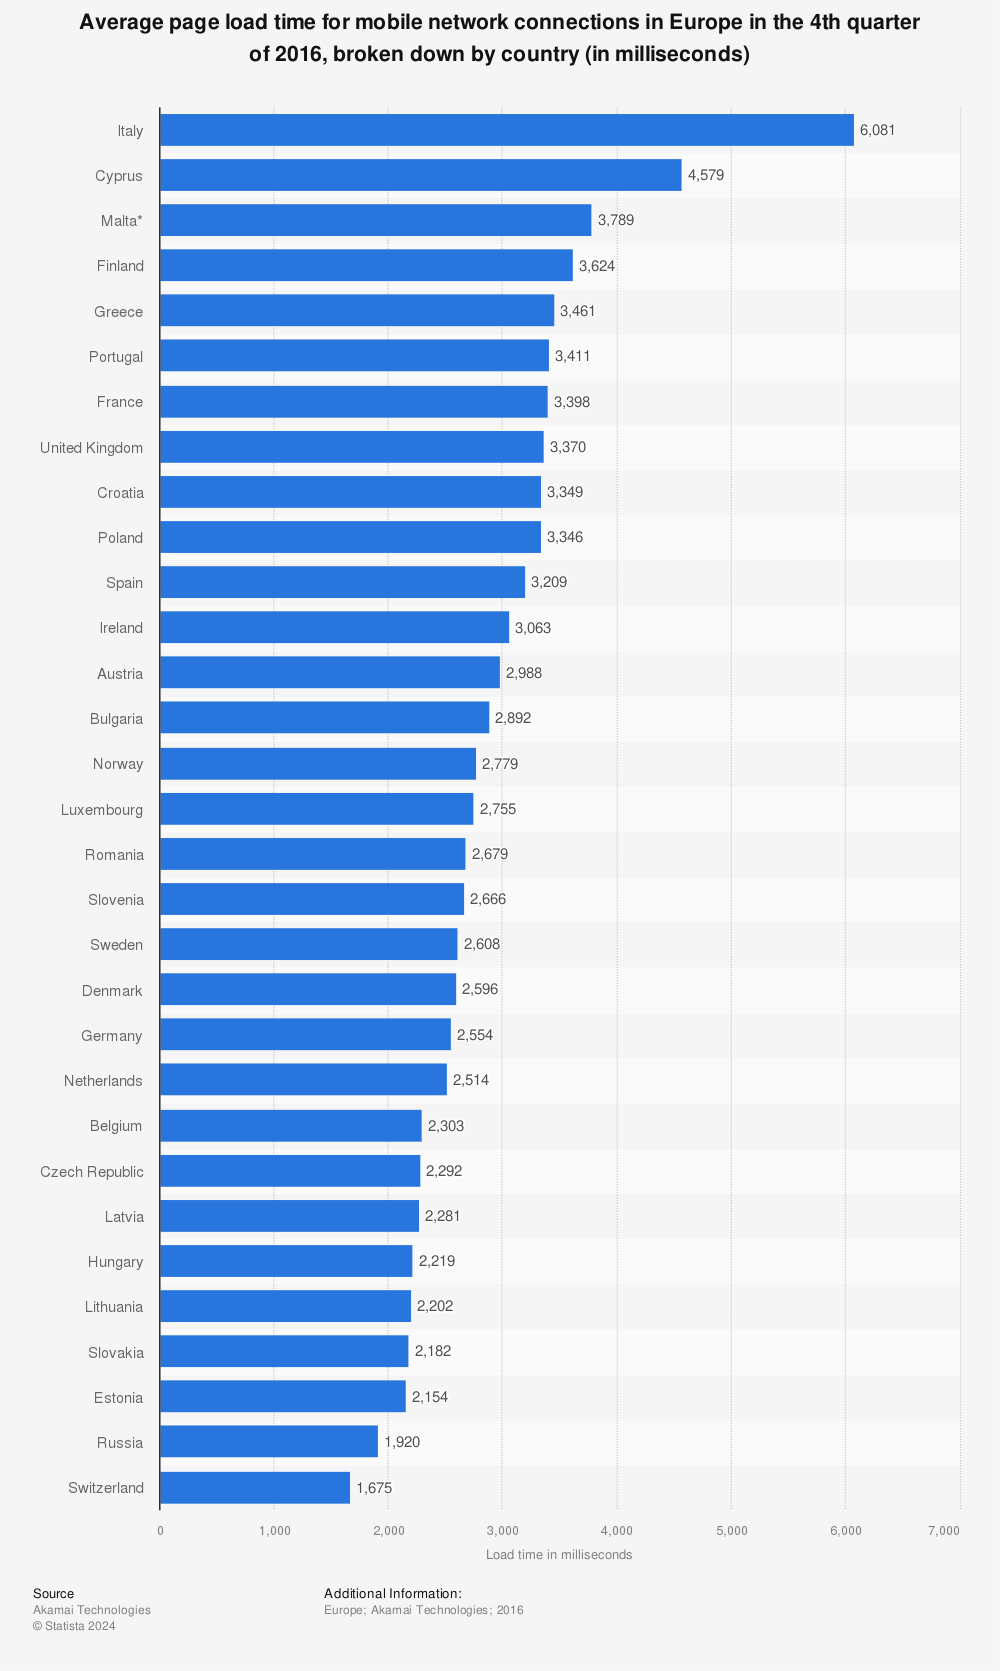 Statistic: Average page load time for mobile network connections in Europe in the 4th quarter of 2016, broken down by country (in milliseconds) | Statista